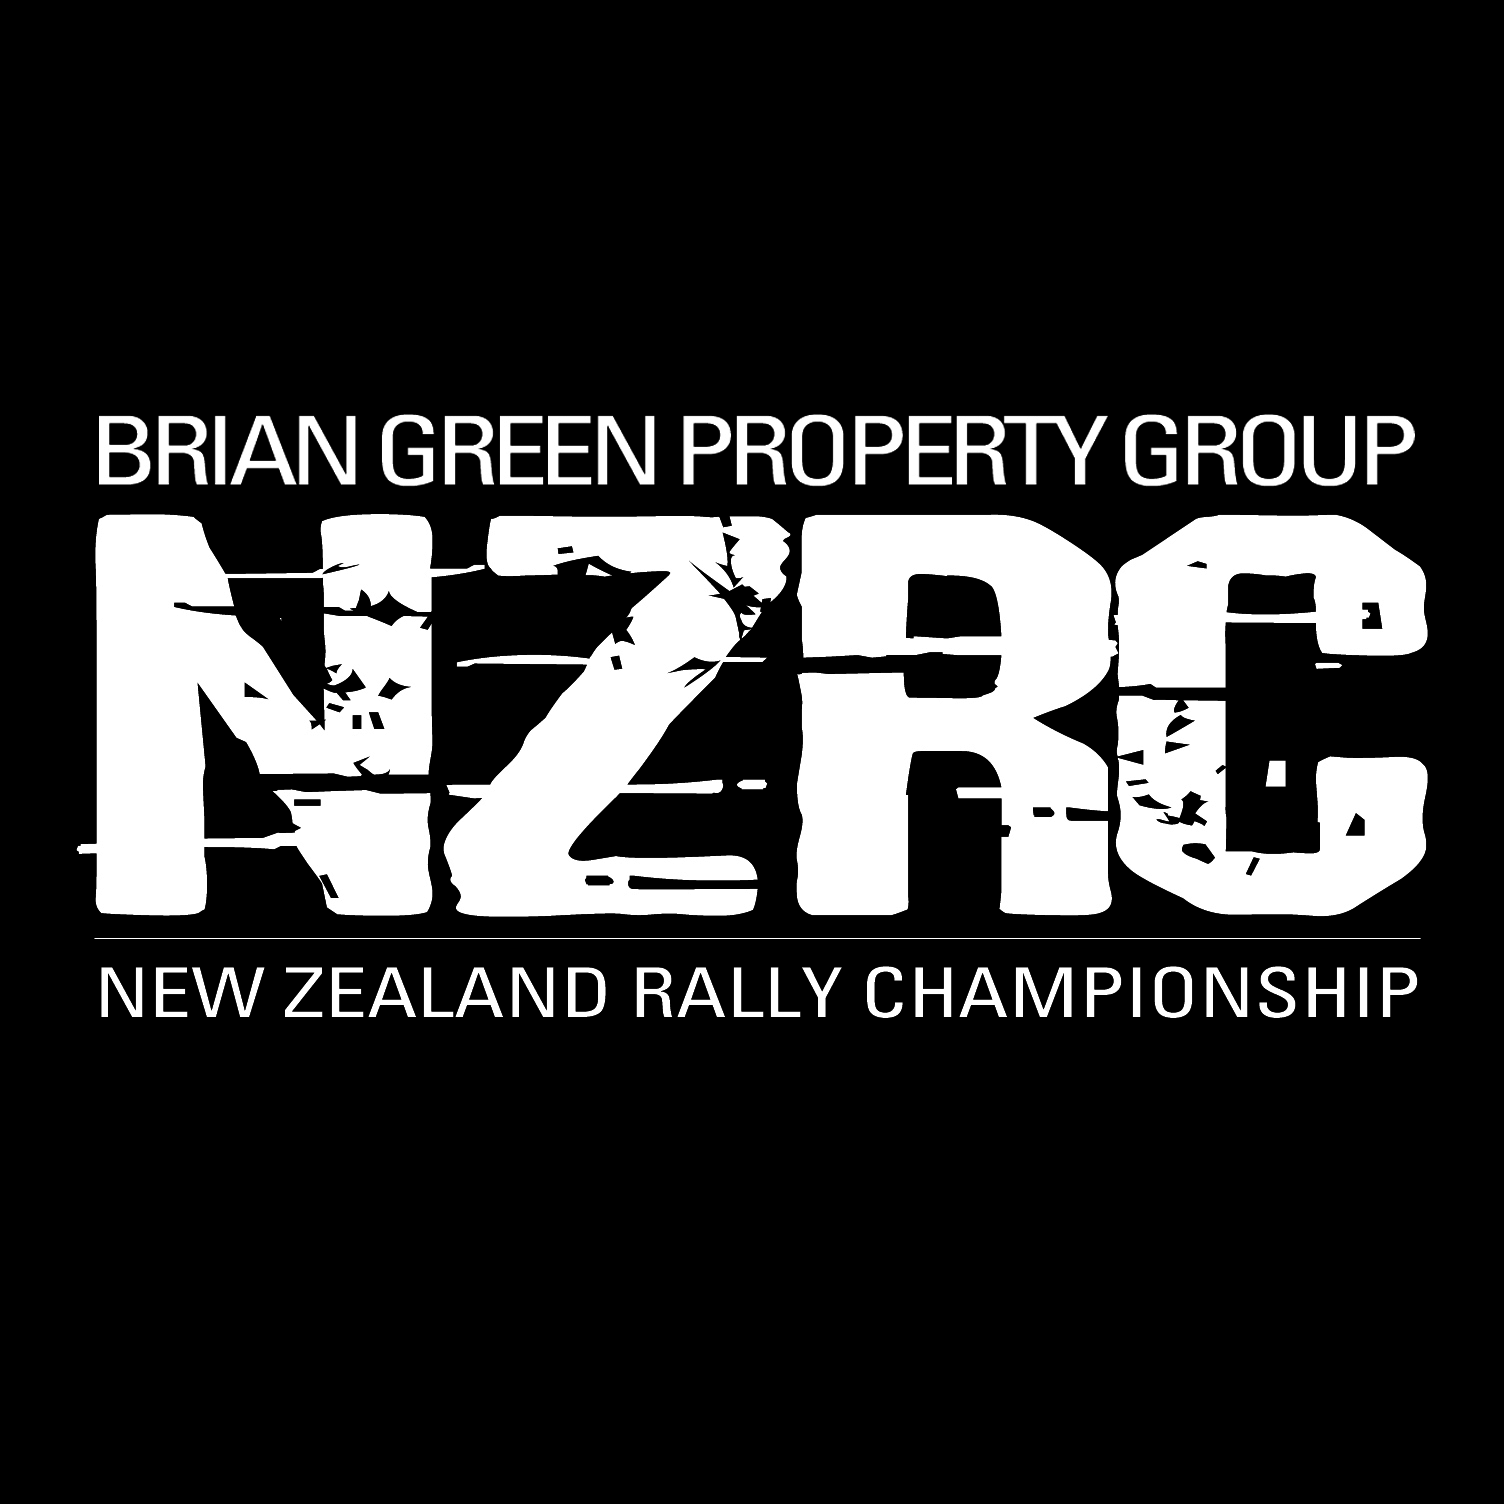 Paddon won’t return to defend title in 2019 | :: Brian Green Property Group New Zealand Rally Championship ::